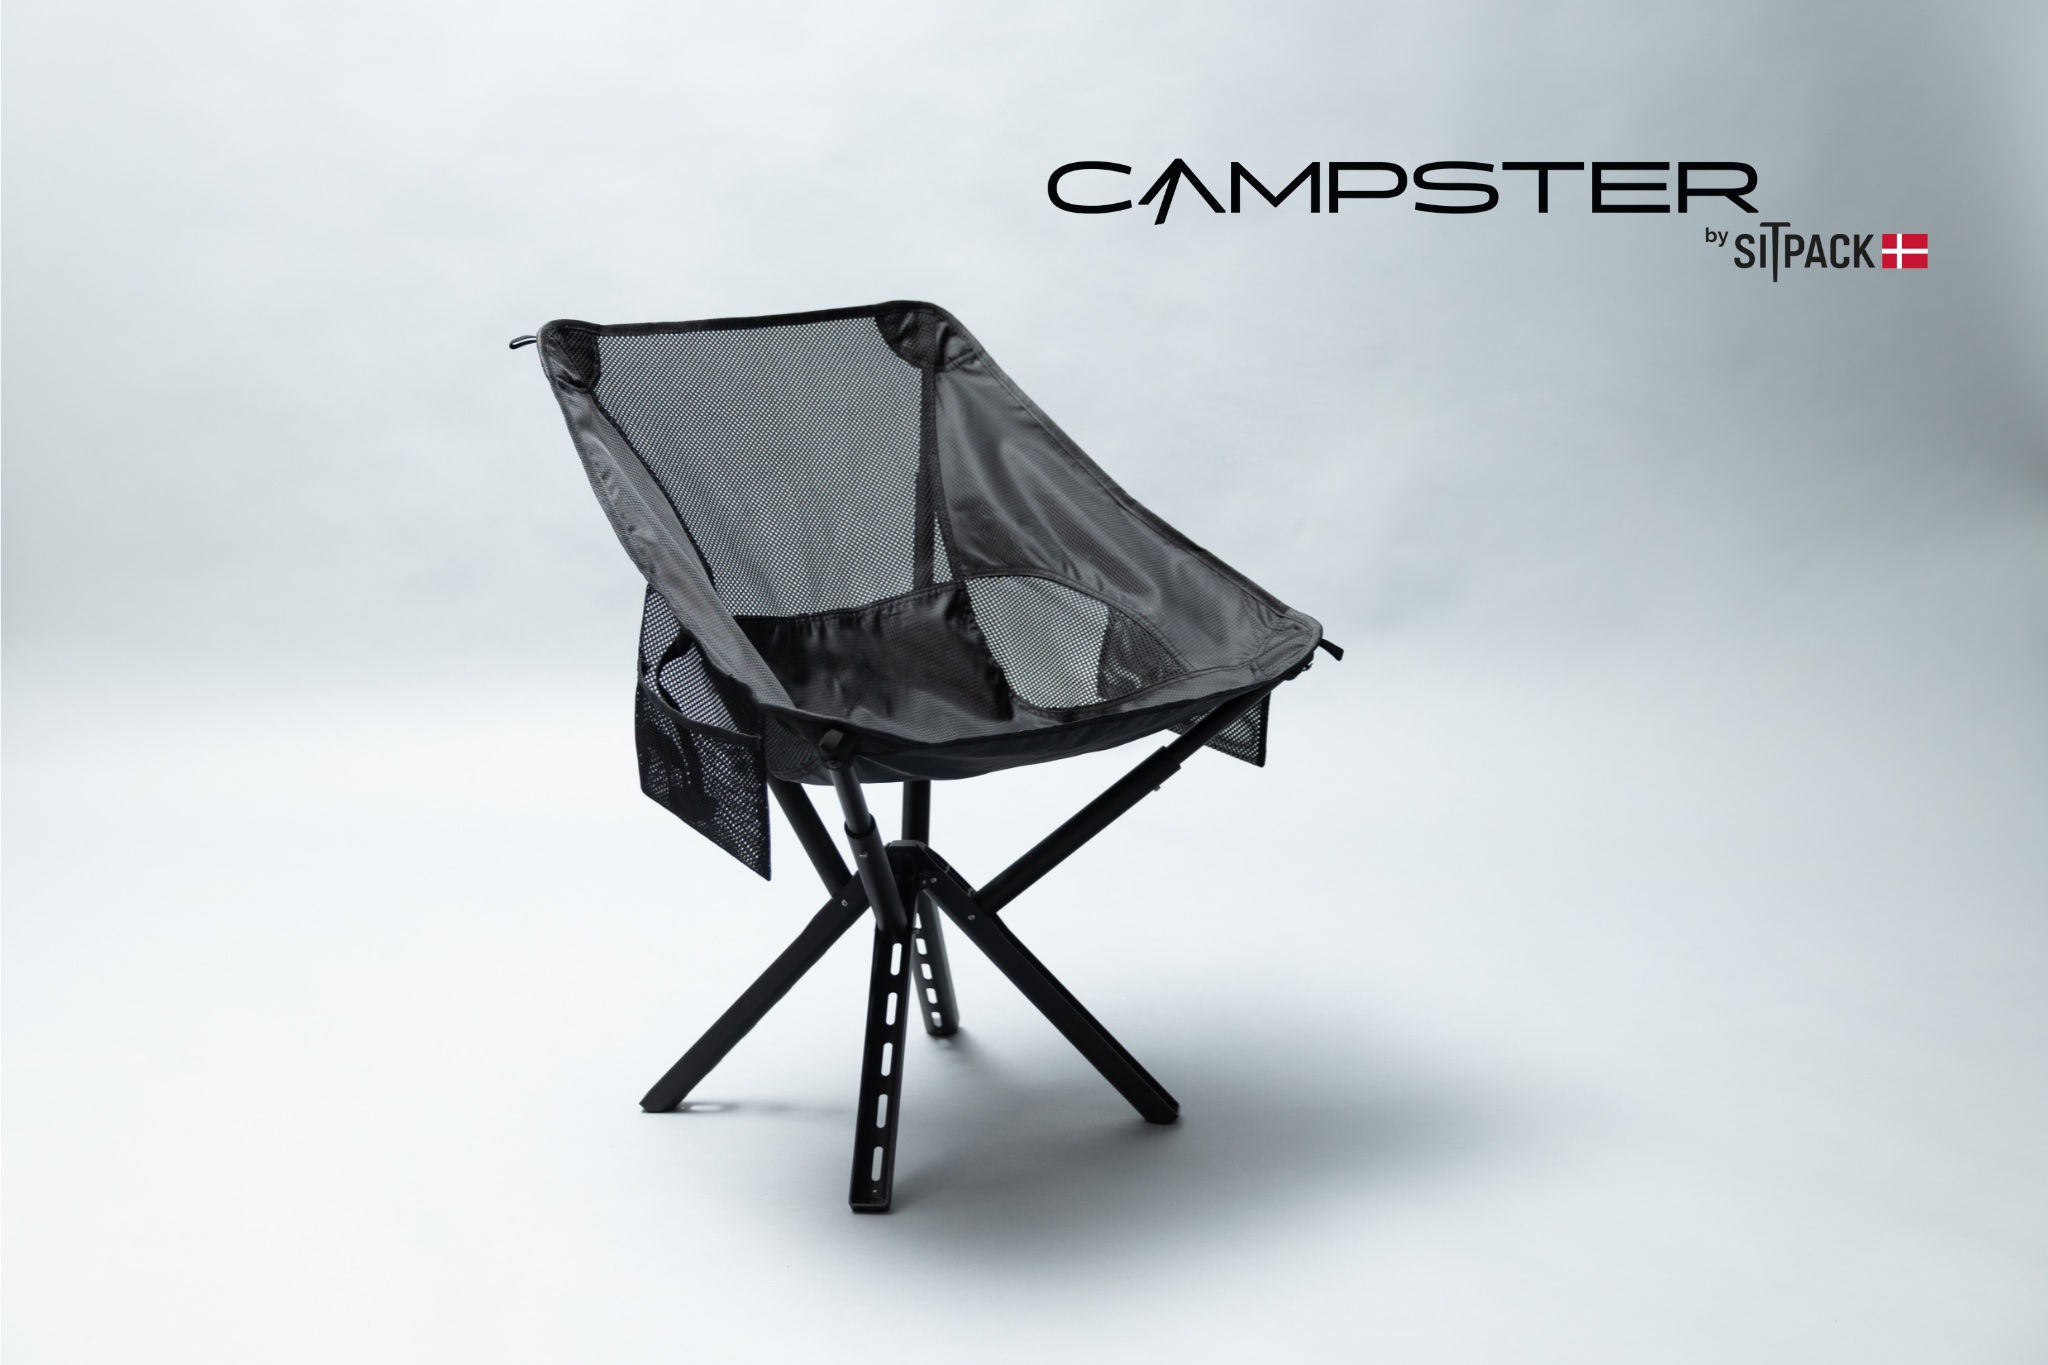 sitpack campster 折りたたみチェア - テーブル/チェア